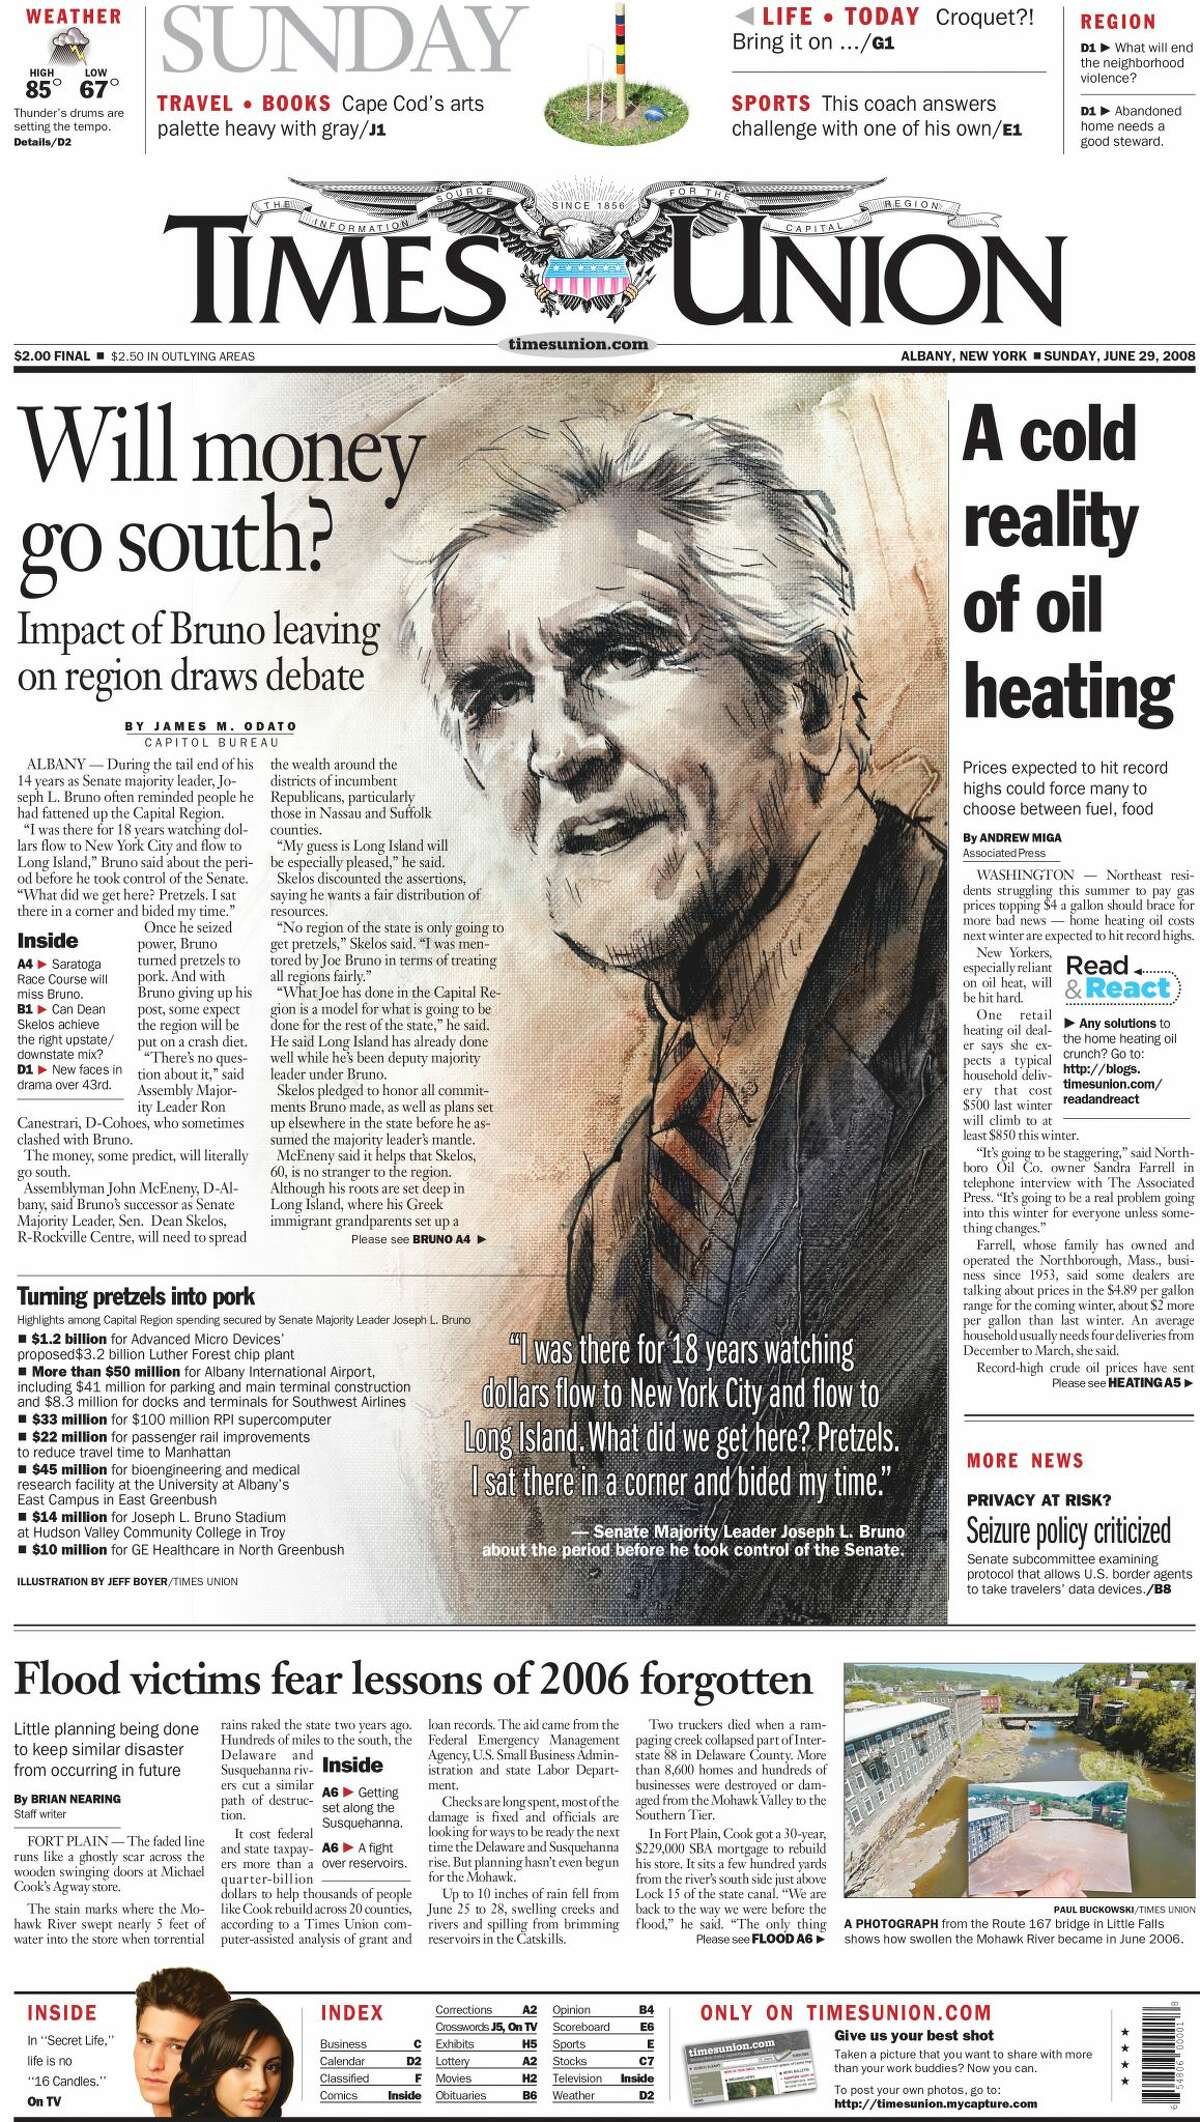 June 29, 2008: News of Bruno's imminent exit from the Senate prompts fears that the loss of his ability to bring home the bacon in terms of state funding could have sweeping impact on the Capital Region economy.